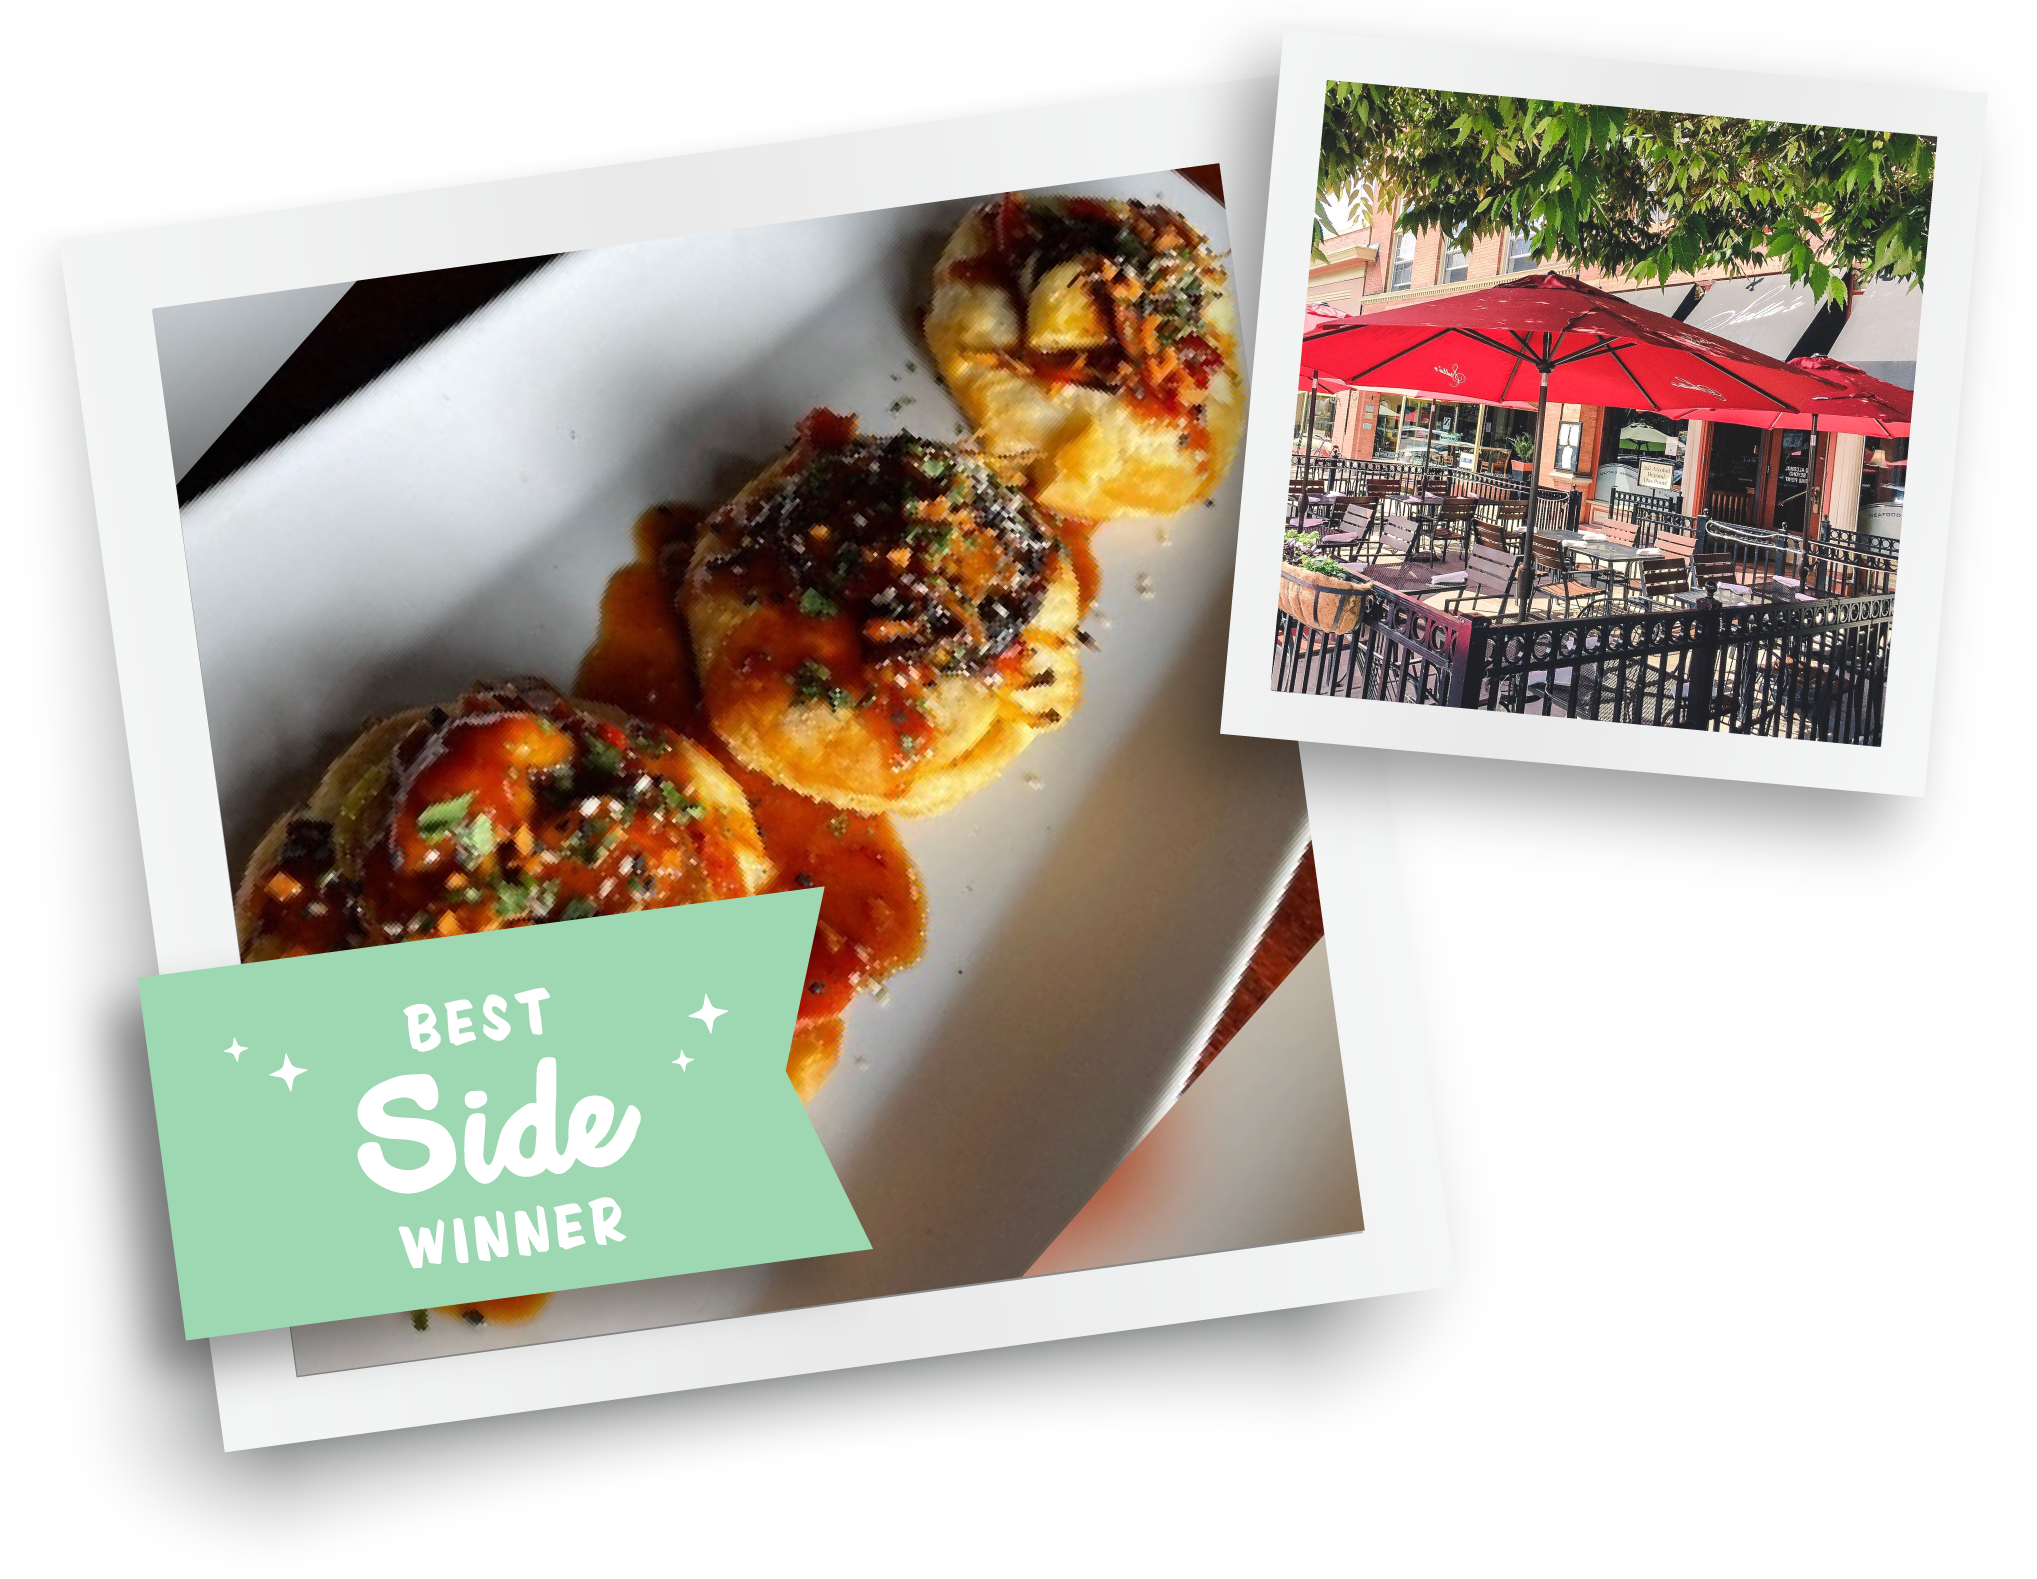 2 polaroid images. Left: Roasted vegetable nest recipe made of biscuits. Best Side Winner banner. Right: Stella’s Restaurant patio.